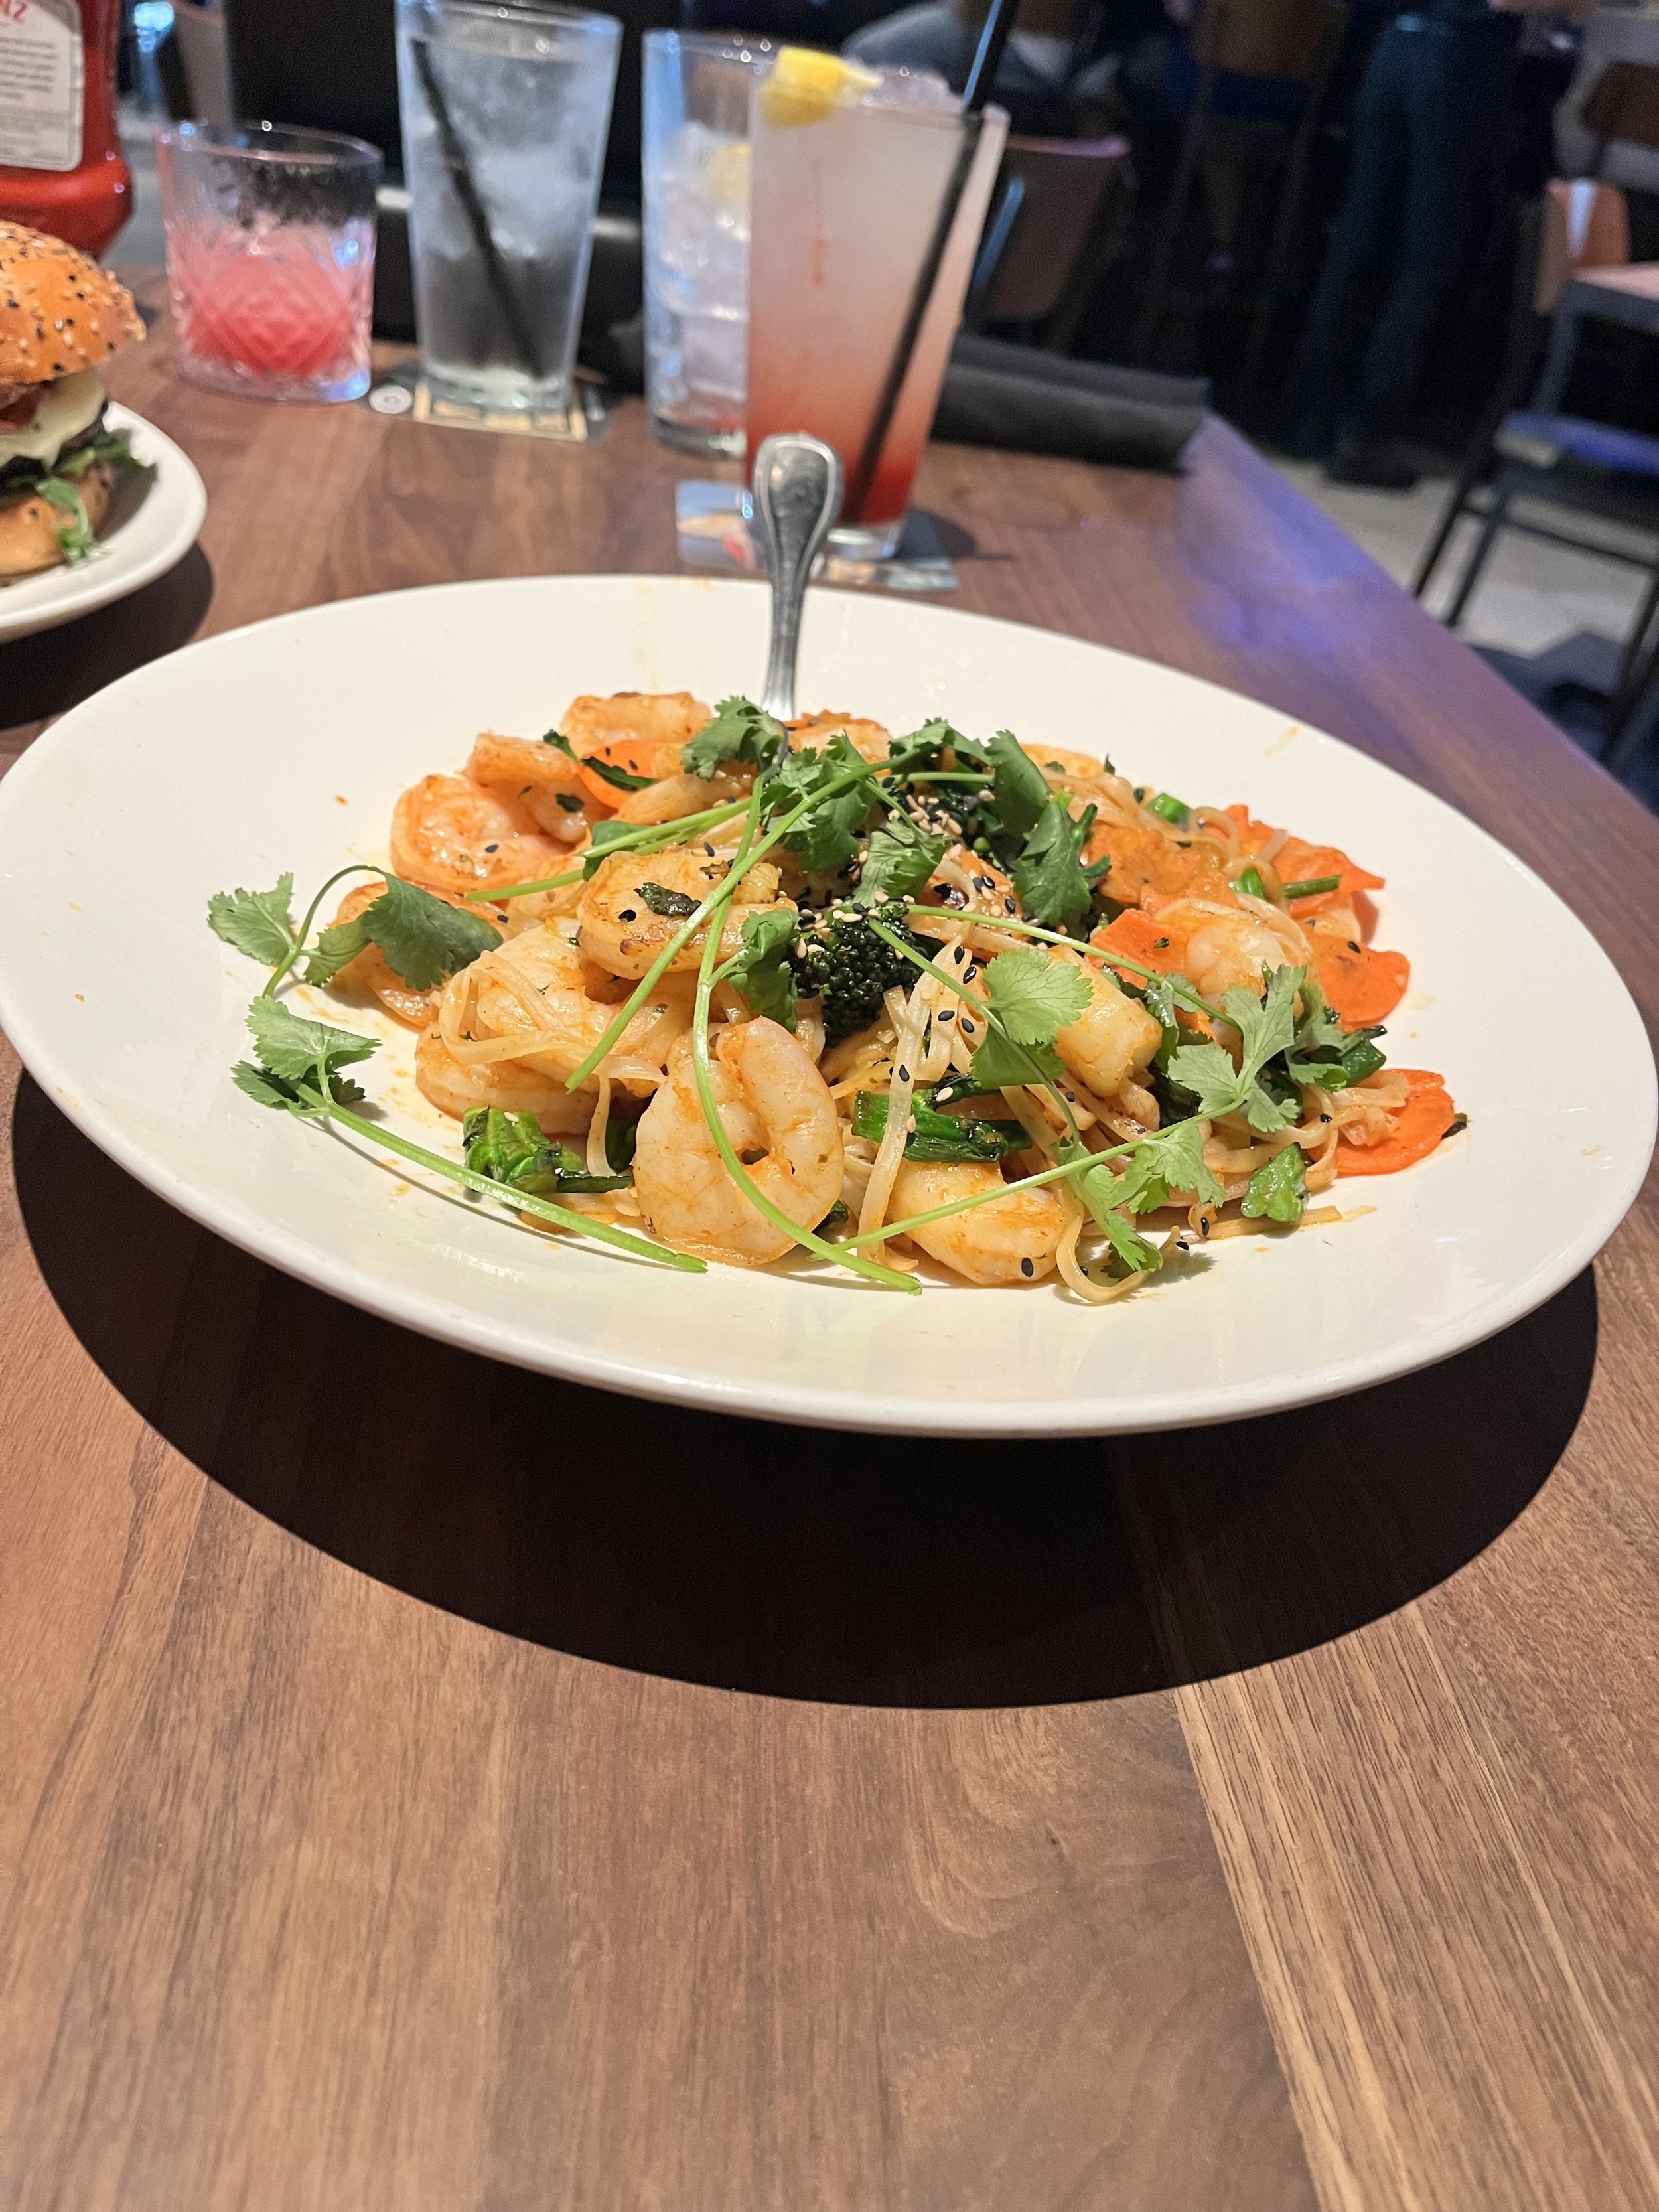 Yard House sweet and spicy shrimp noodles Tampa Florida.jpg